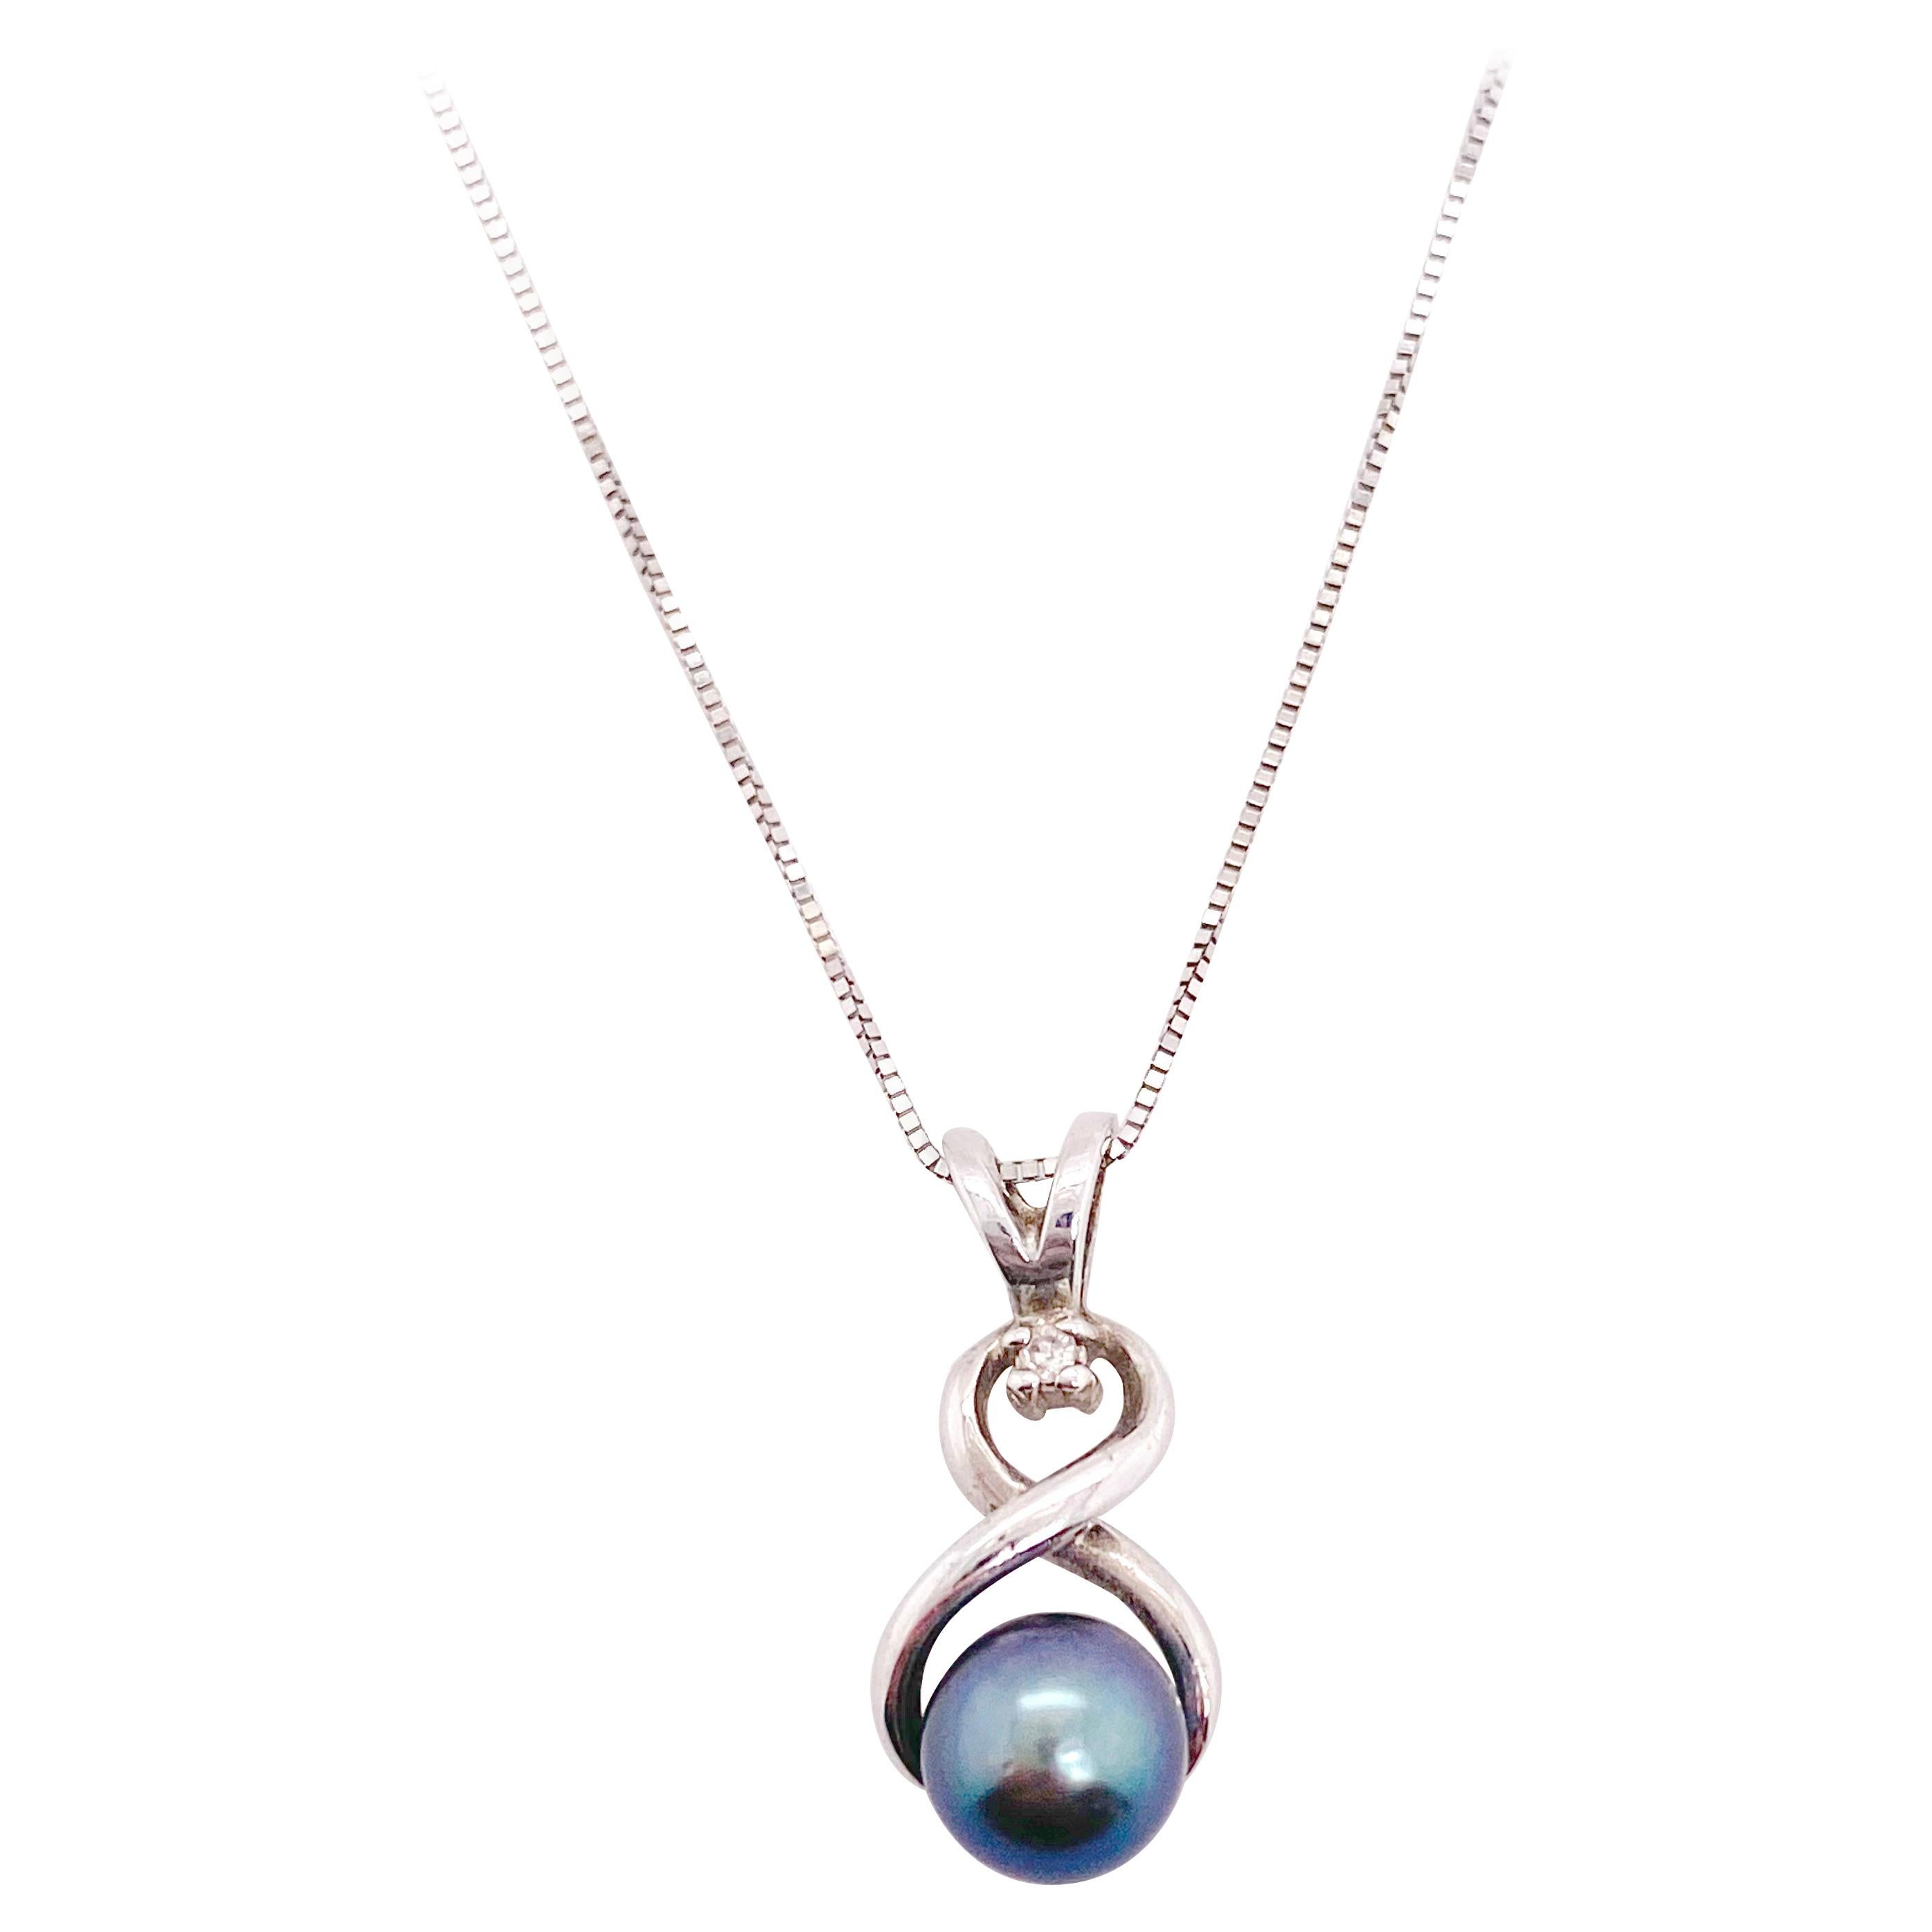 Black Pearl Necklace, Infinity Shape Pendant, White Gold Box Chain